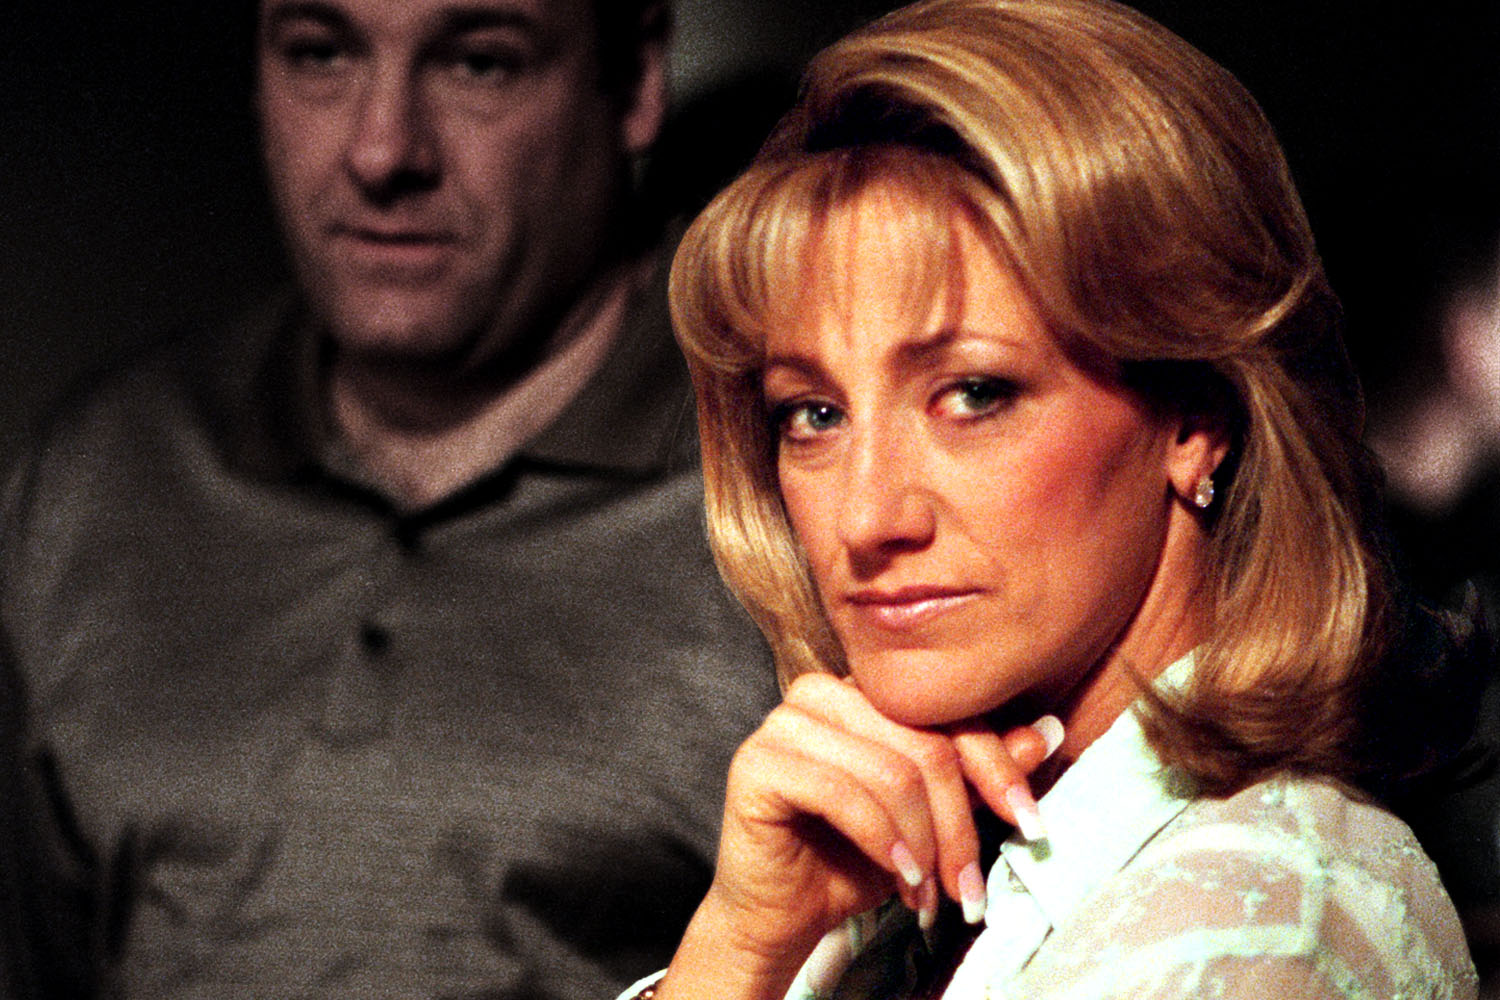 “The Sopranos” for Women Is Just … “The Sopranos”